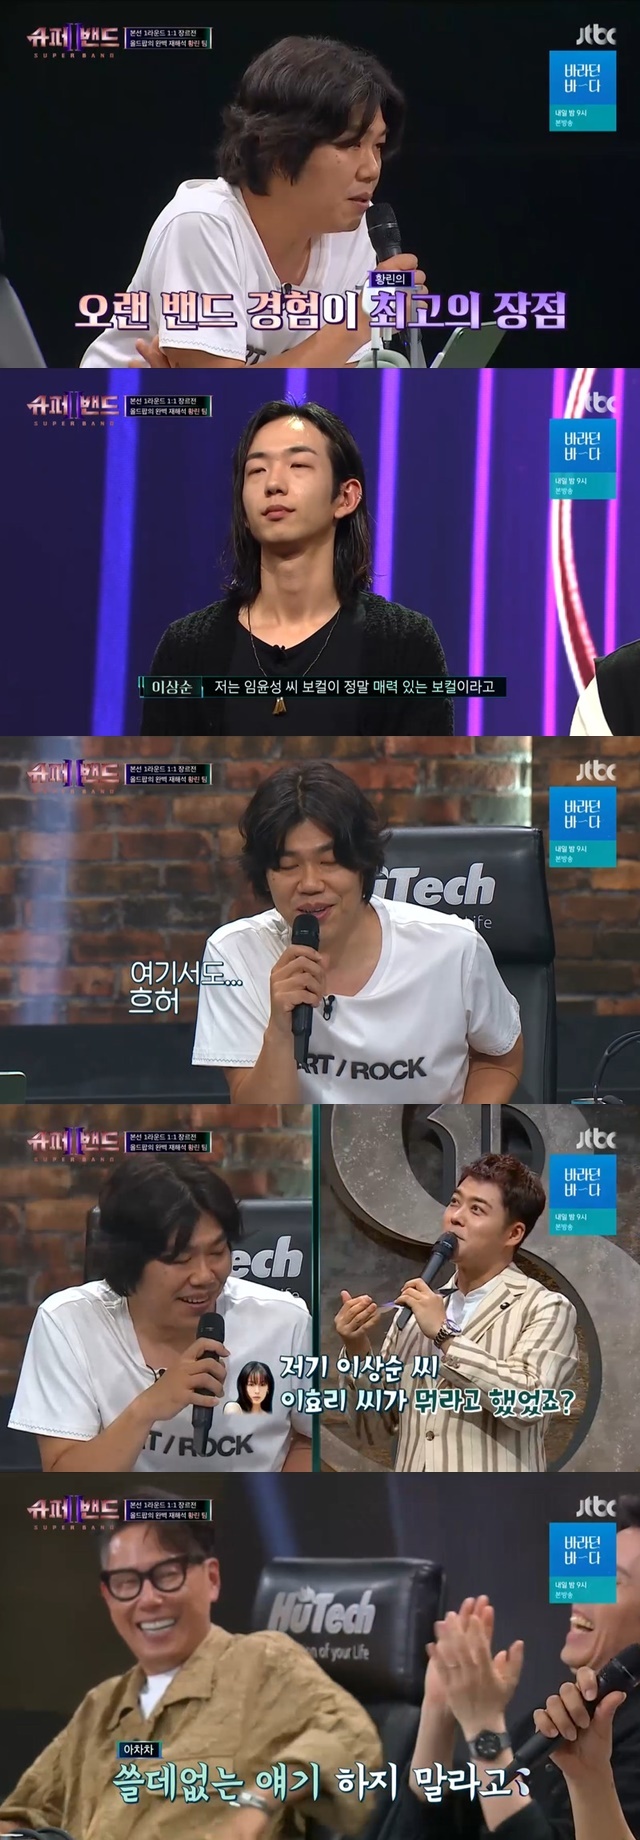 Jun Hyun-moo mentioned Lee Hyori in Lee Sang-soons lengthening review.Lee Sang-soon praised the pianoman of the Hwanglin team at JTBC Alvin and the Chipmunks: The Squeakquel broadcast on July 19th.In the first round of the finals, Hwanglin team arranged Billy Joels Piano Man and presented the latest version of Piano Man.Hwanglins guitar, Lim Yoon-sungs vocals, and Kim Jun-seos piano combined to give a thrill to the chords accumulated in climax.The producers reviews were well received. Lee Sang-soon said, I knew Hwang-rin would do this well. I kept thinking at home.I think its best to be a band. I have a good understanding of sound. I saw you with pedals when you play Elek guitar.The composition that I can ask for is well filled.